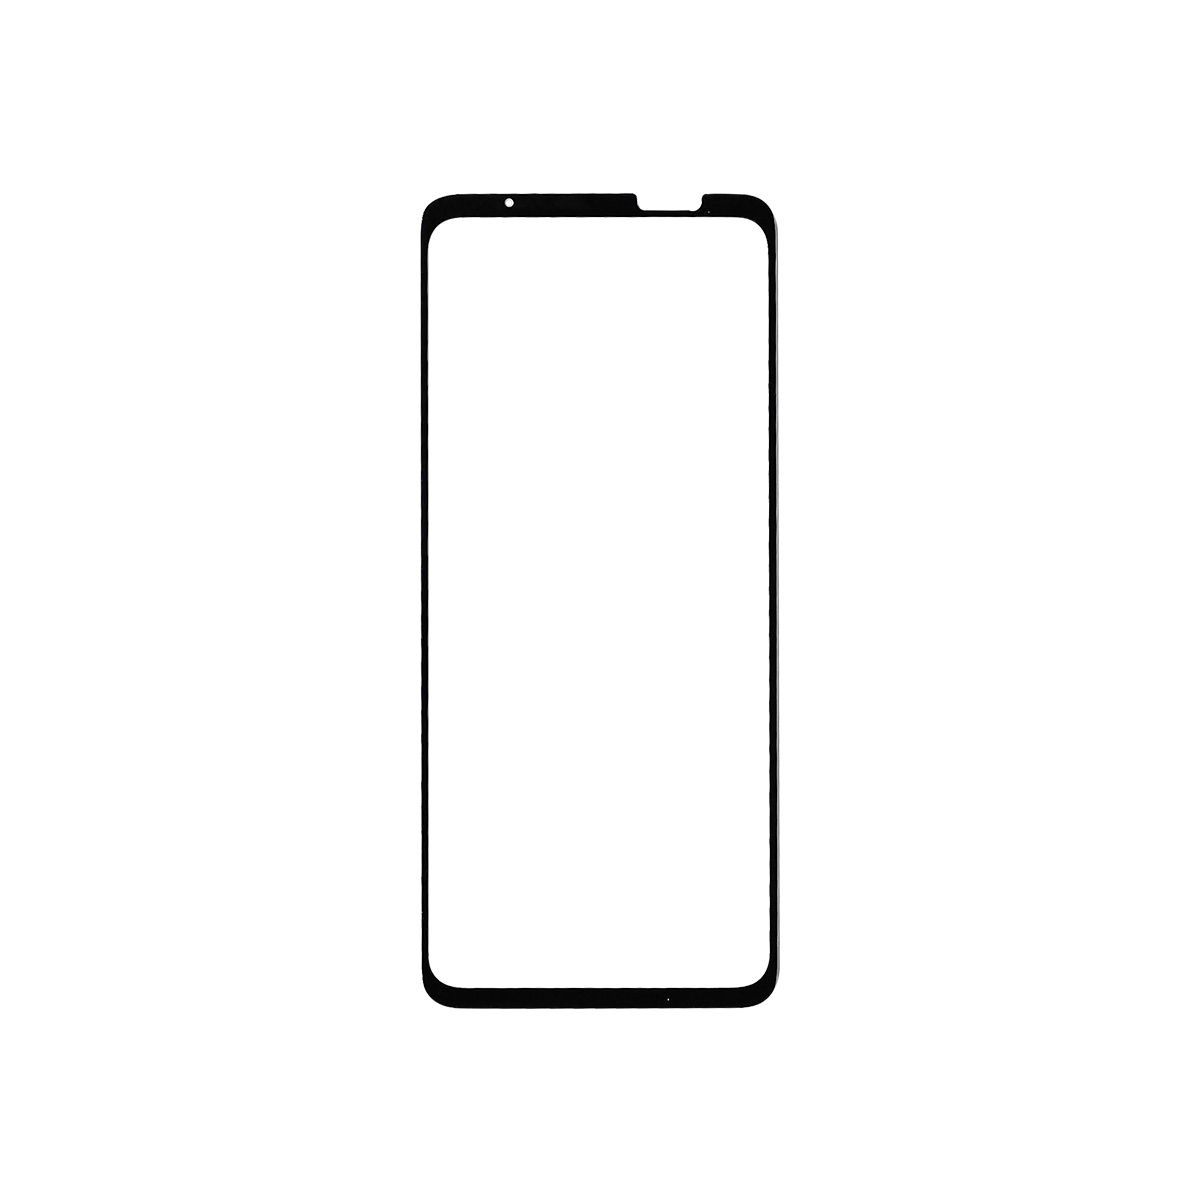 sprig full cover tempered glass screen protector for asus rog phone 5 ultimate